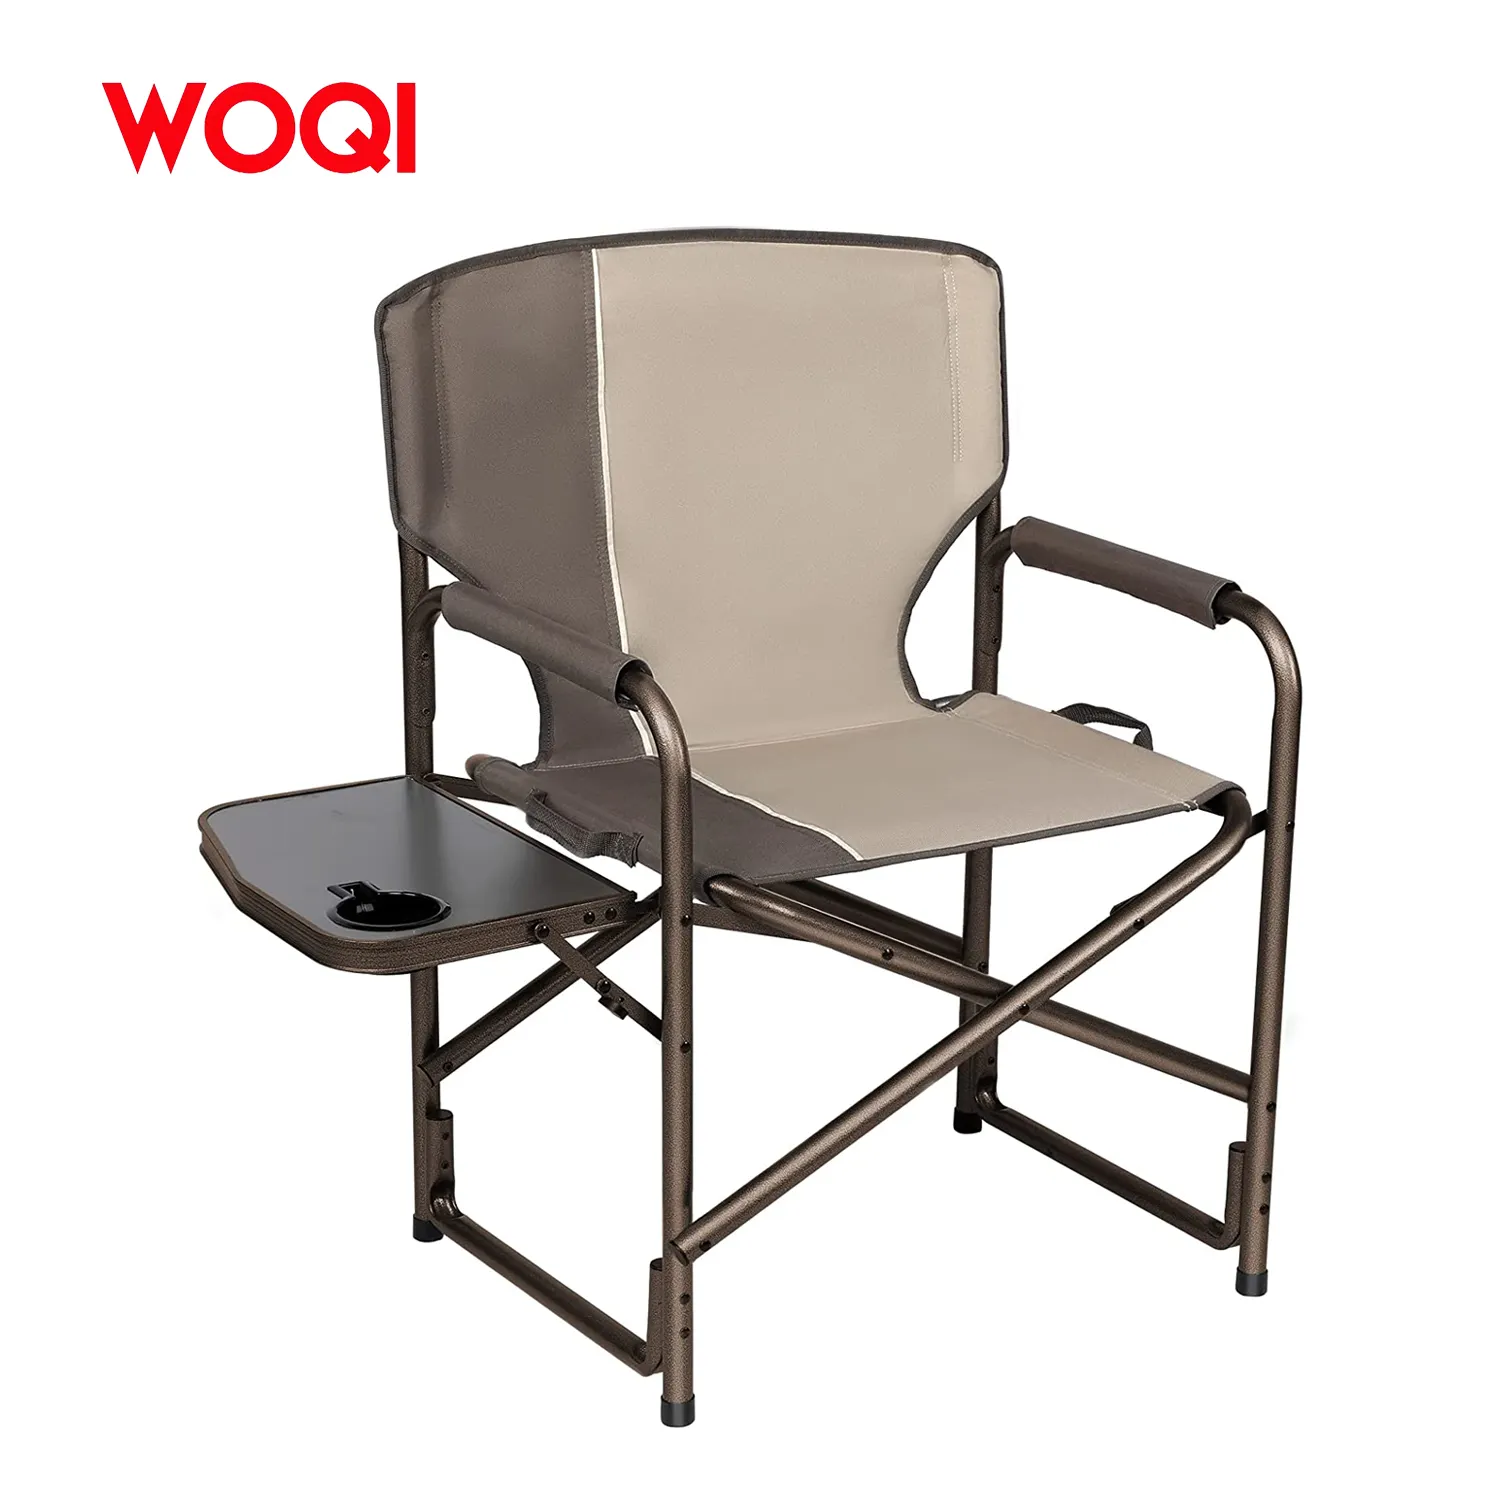 Woqi New Style Outdoor Portable Hunting Chair With Side Table Folding Director Chair Camping Chair